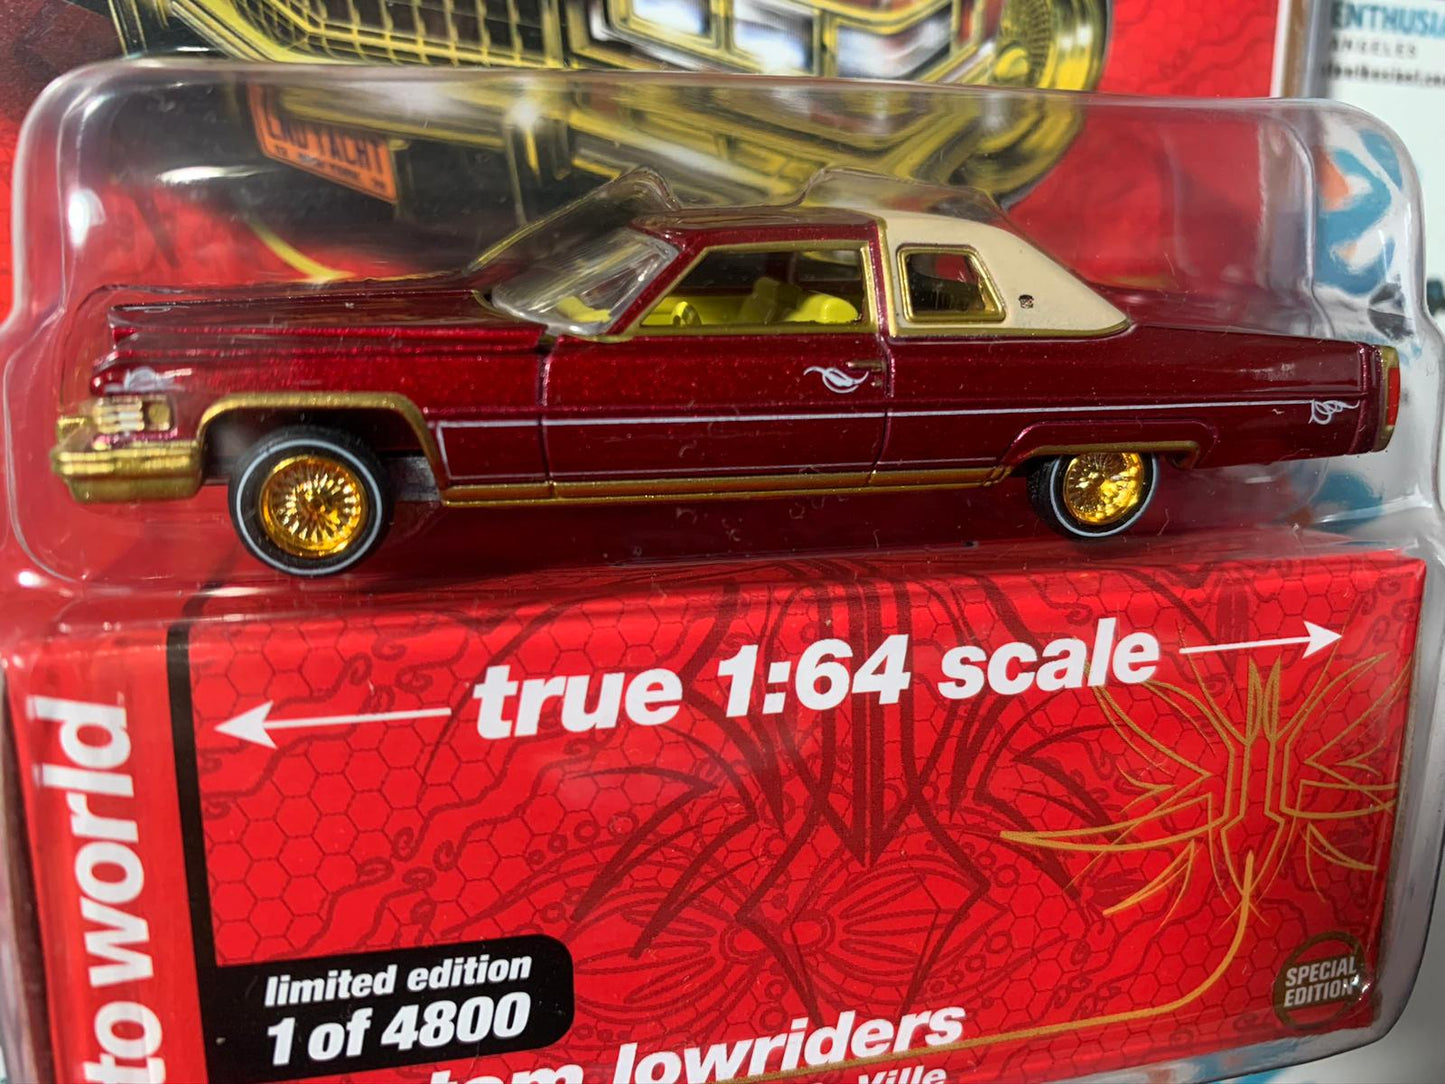 CHASE ULTRA RED Auto World Lowriders 1976 Cadillac Coupe DeVille Brown